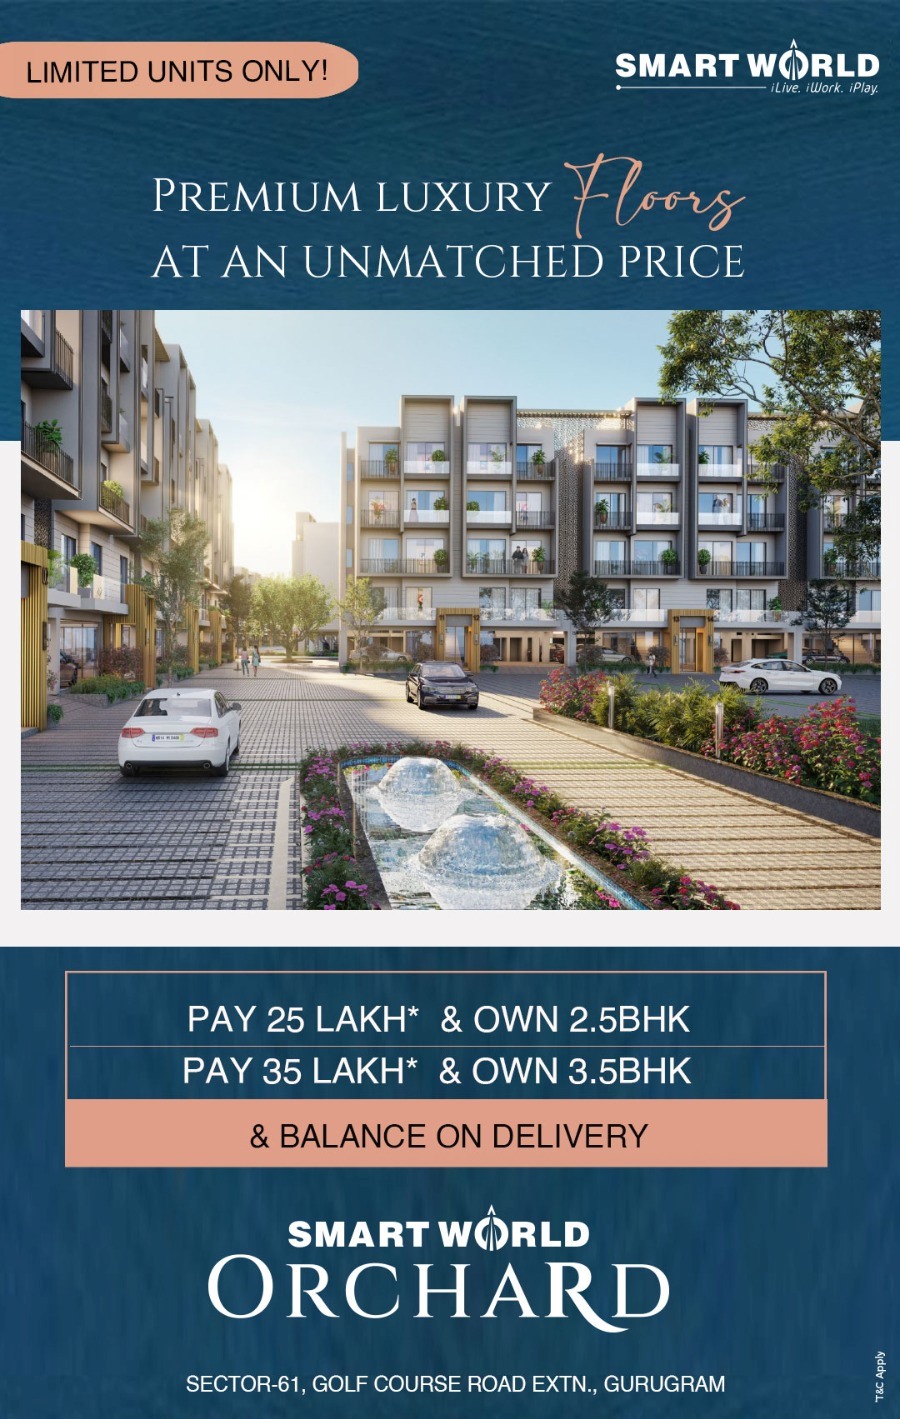 Limited units only at Smart World Orchard in Golf Course Extension Road, Gurgaon Update